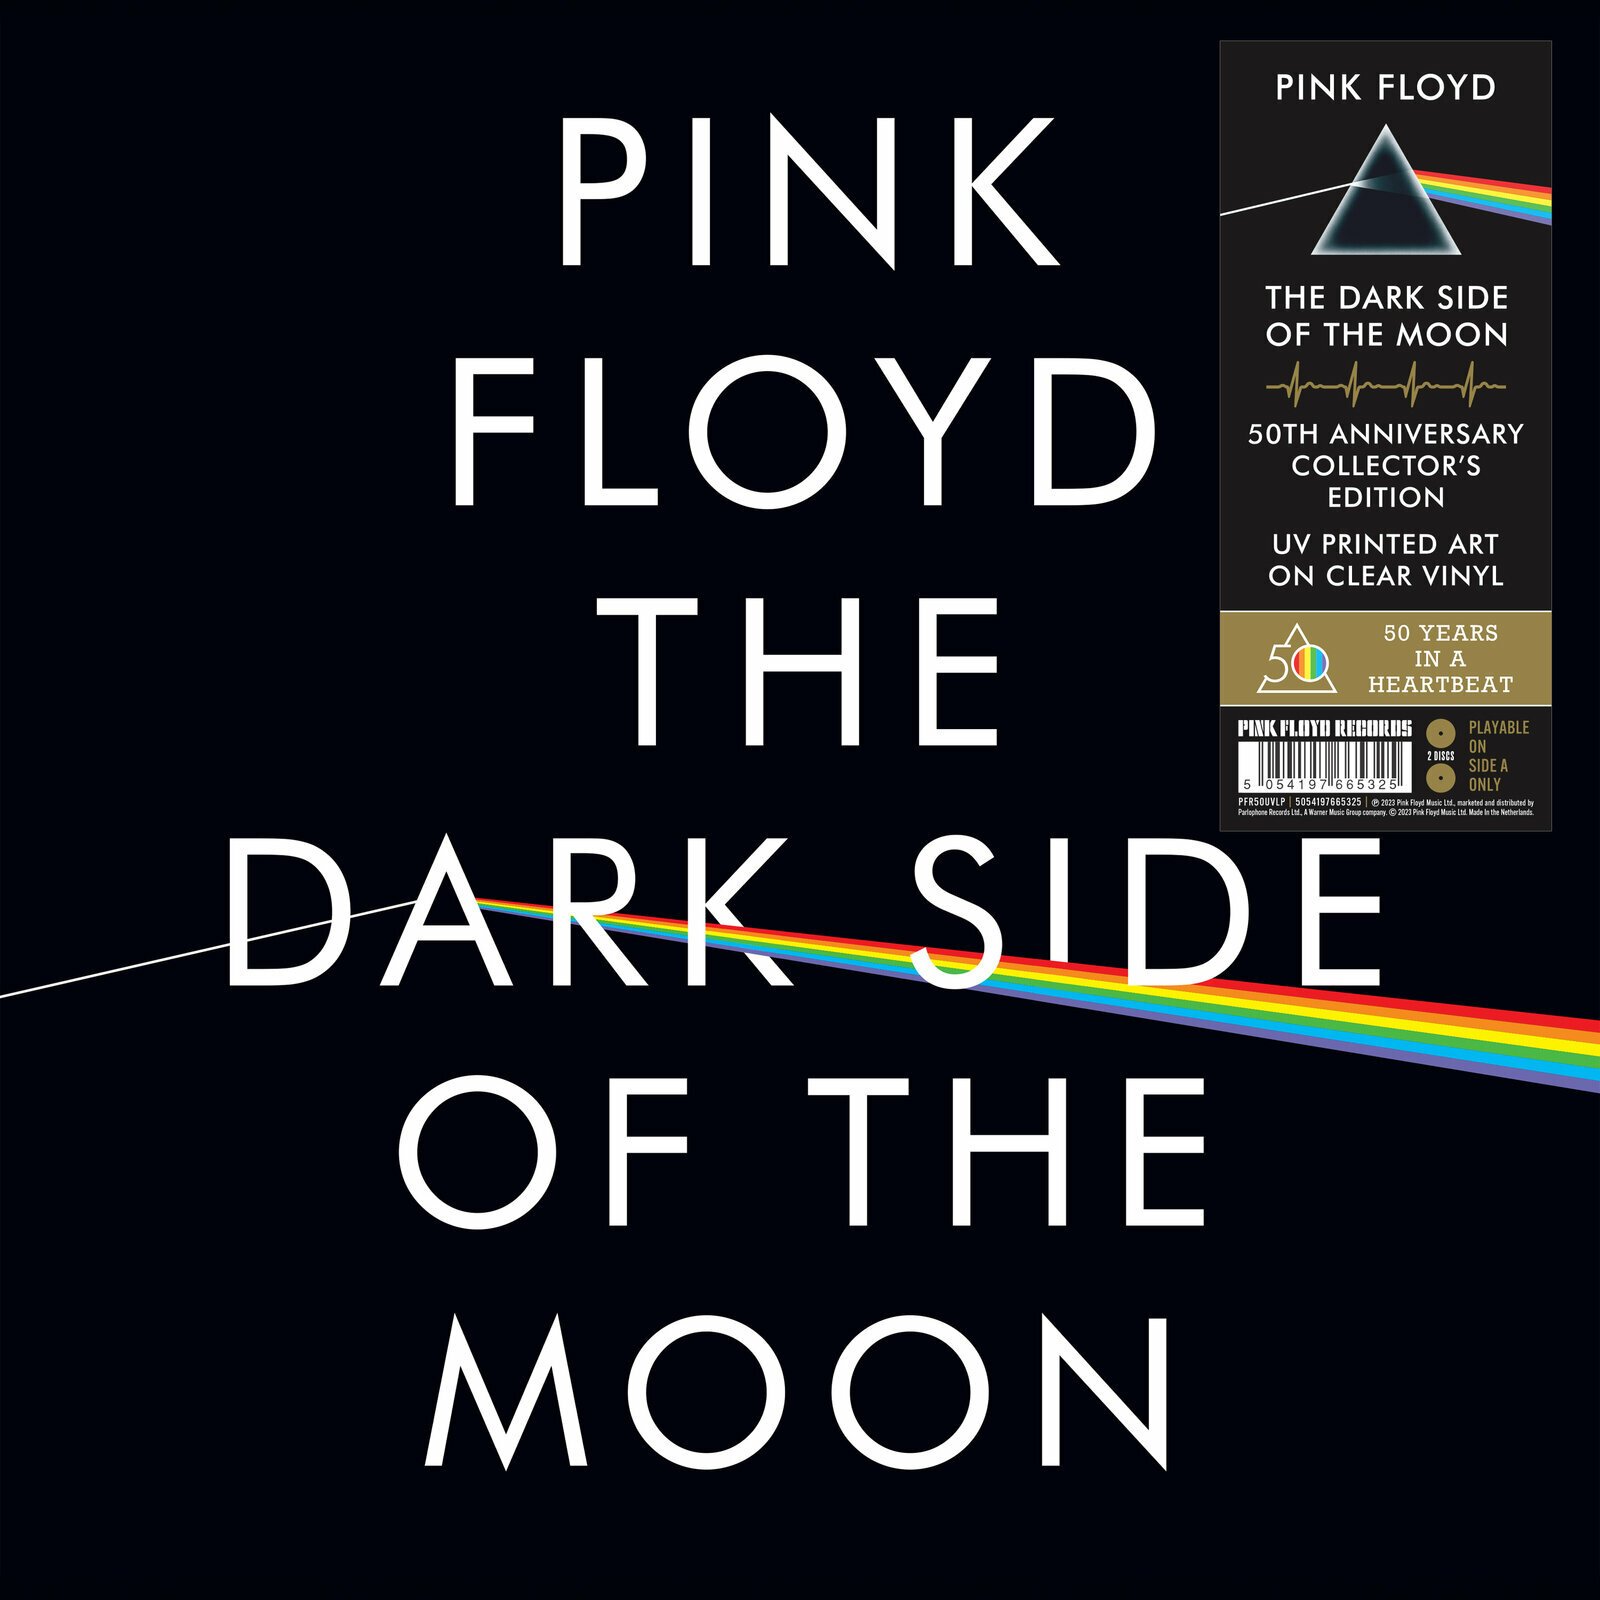 LP plošča Pink Floyd - The Dark Side Of The Moon (50th Anniversary Edition) (Limited Edition) (Picture Disc) (2 LP)